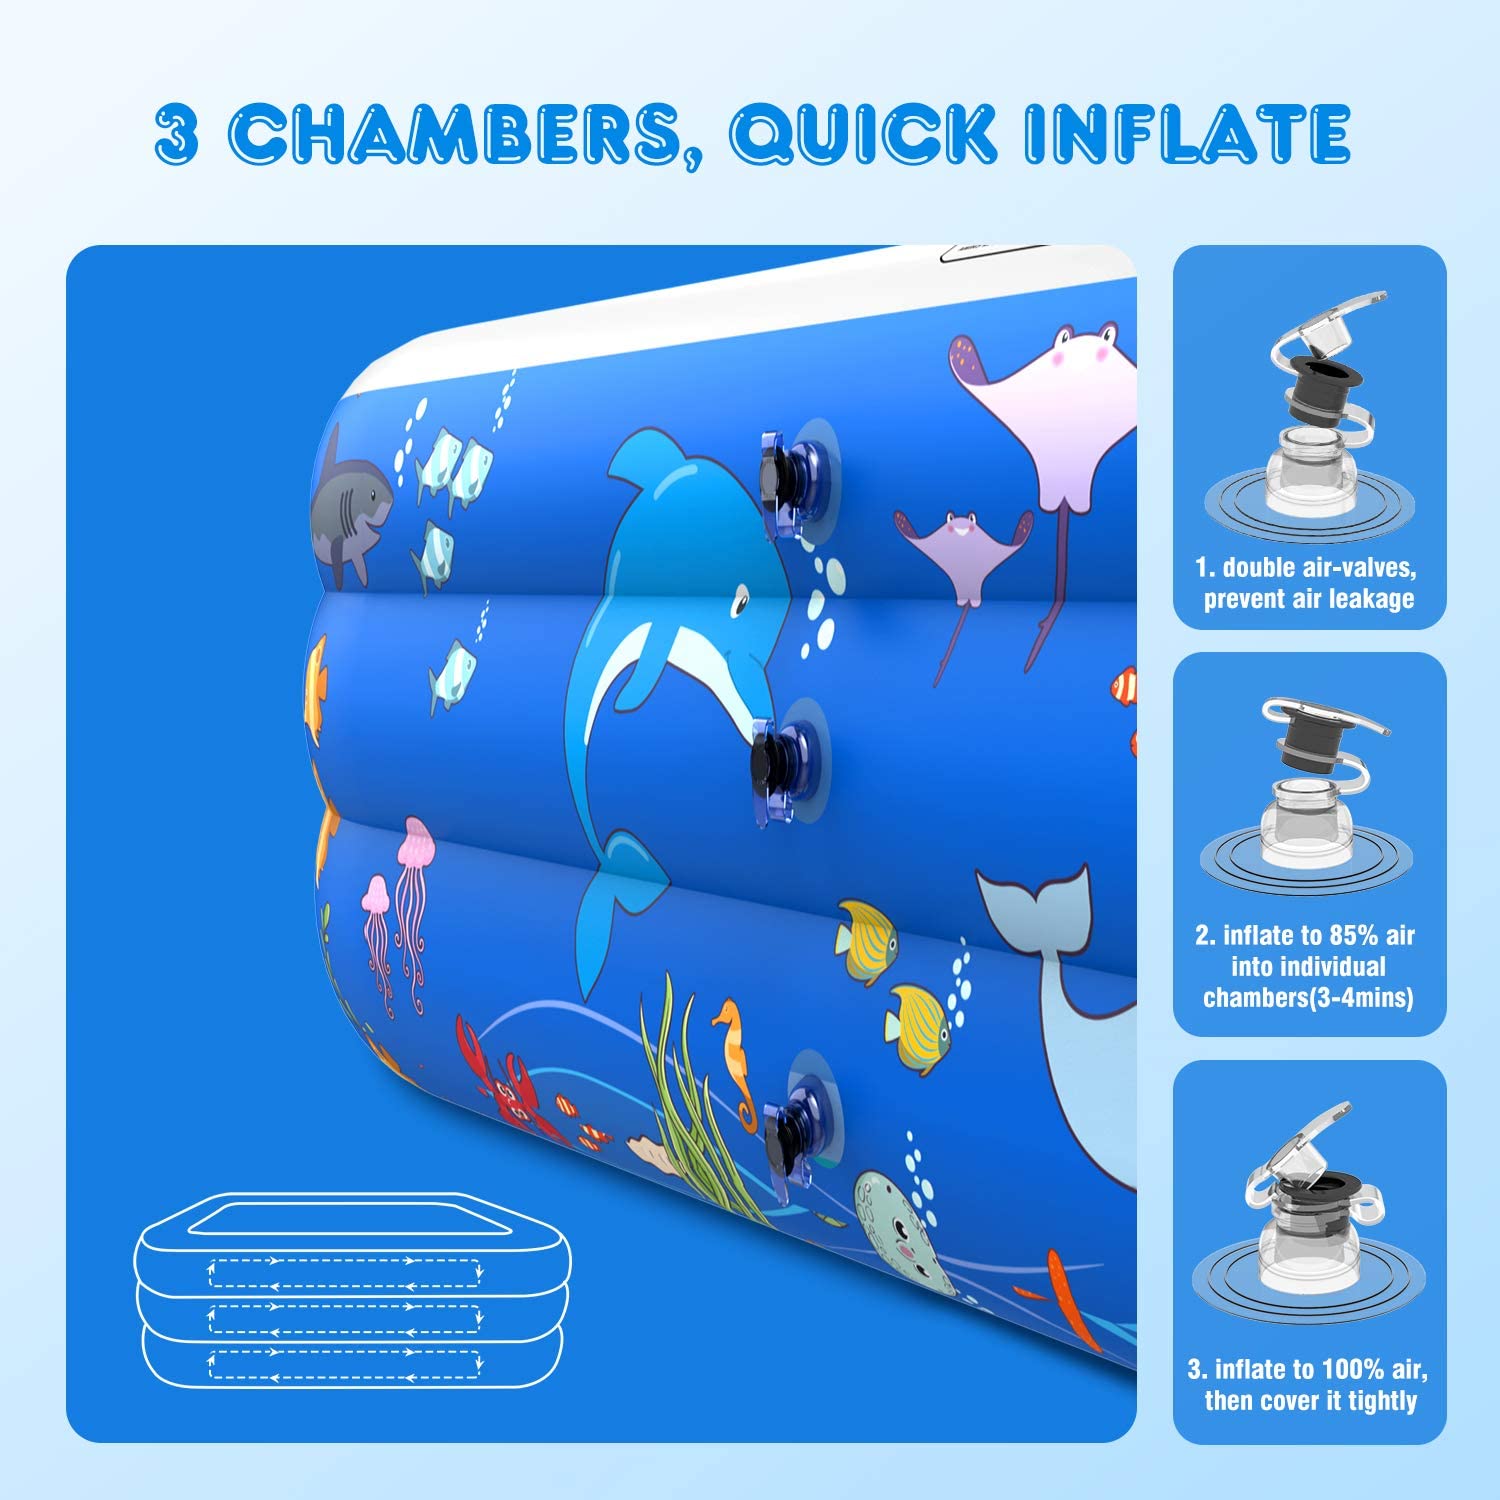 Inflatable Pool for Kids, Kiddie, Toddler, Adults, 100" X 71" X 22" Family Full-Sized Swimming Pool